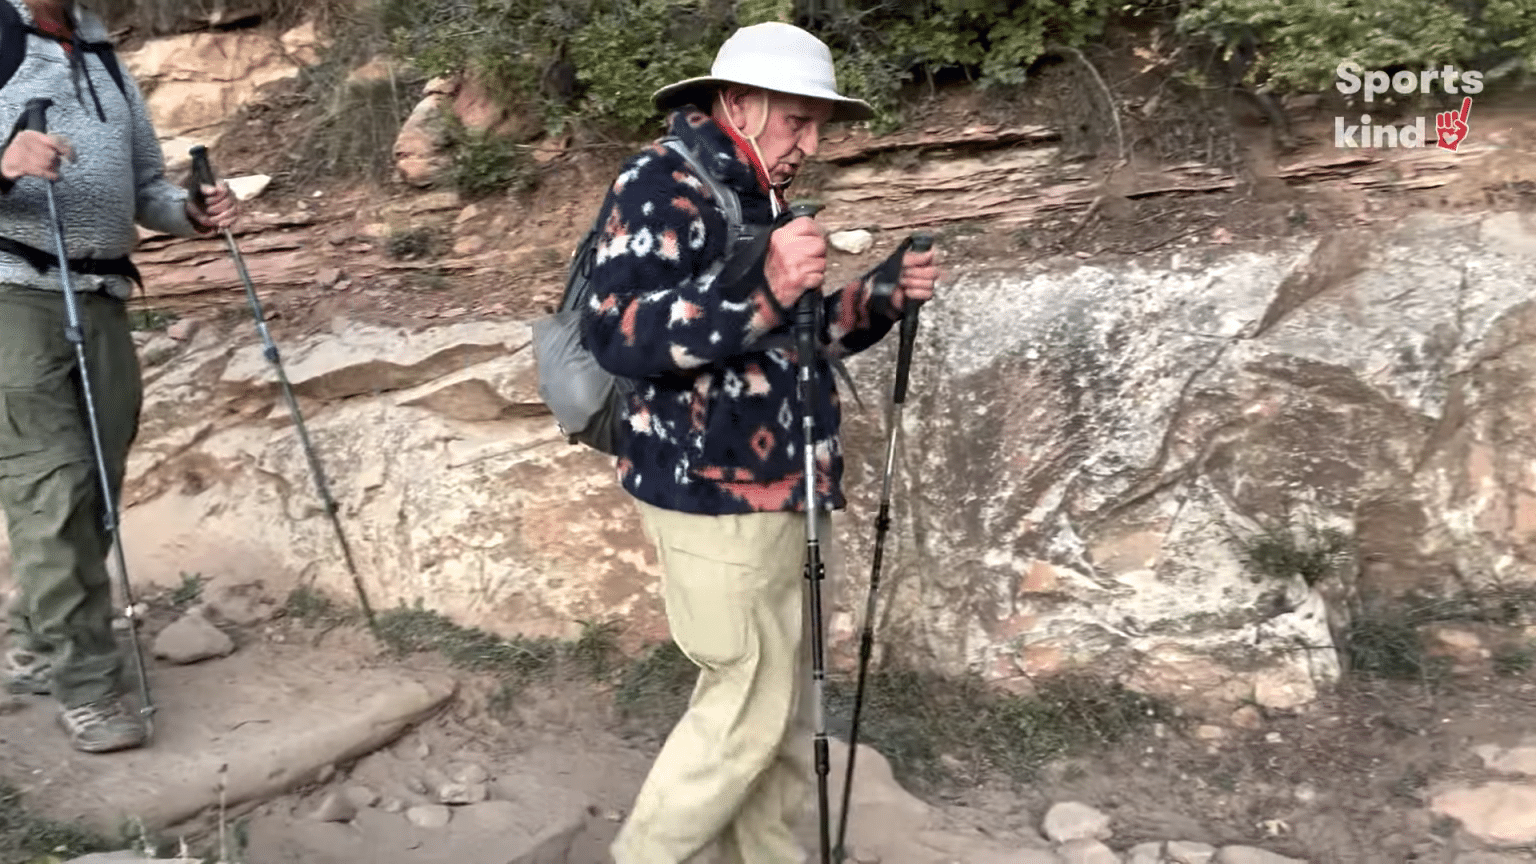 92 Year Old Man Becomes Oldest Person To Hike Across Entire Grand Canyon